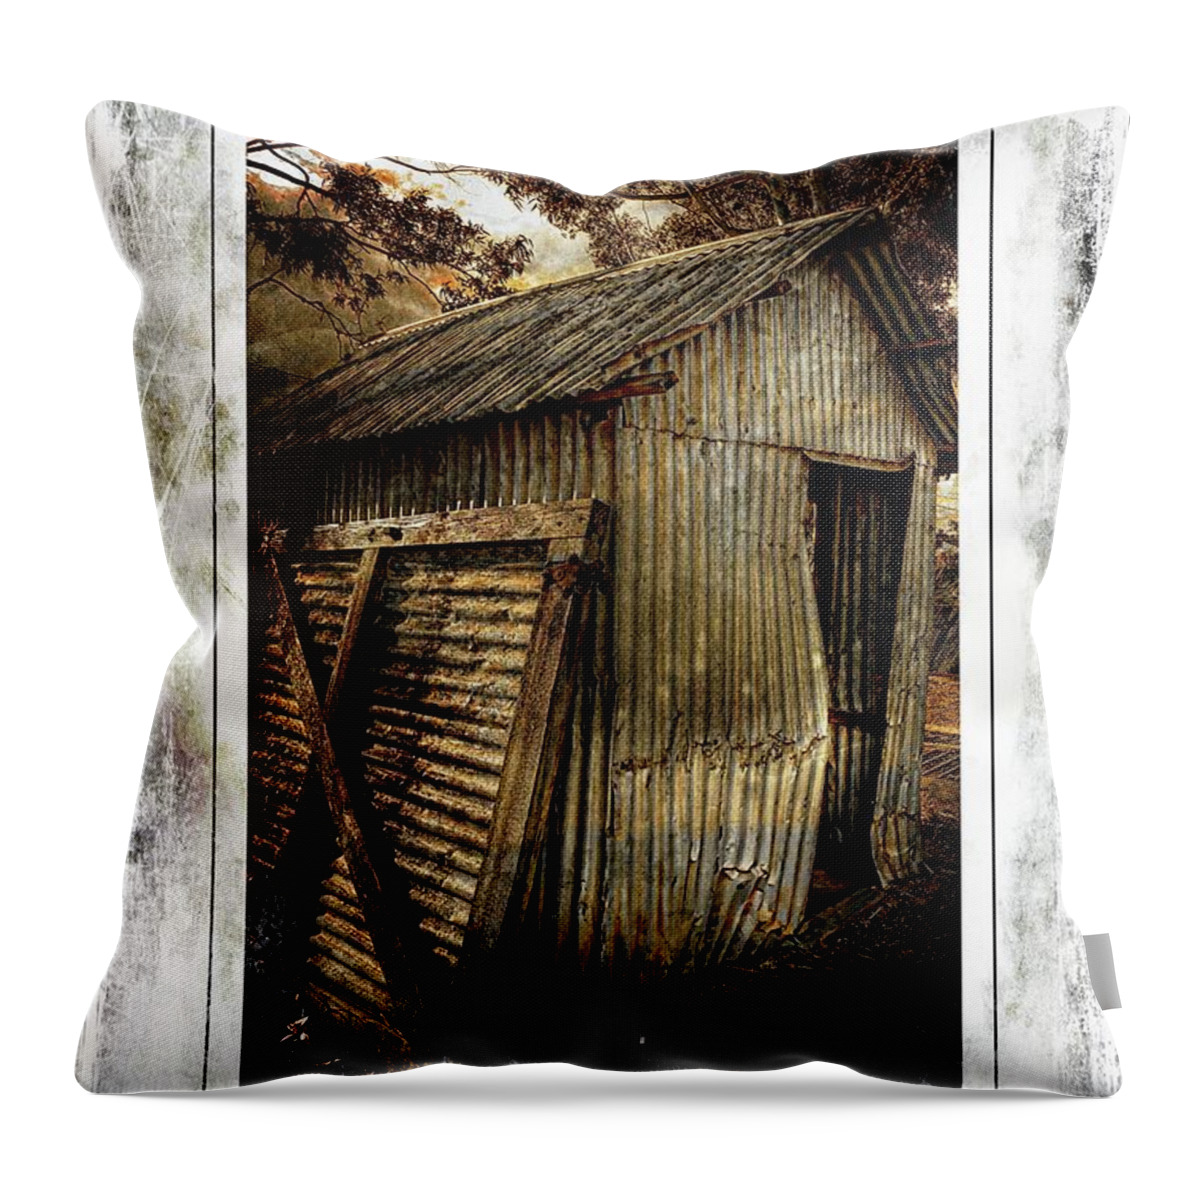 Shed Throw Pillow featuring the photograph Abstract Vintage Shed by Michelle Liebenberg